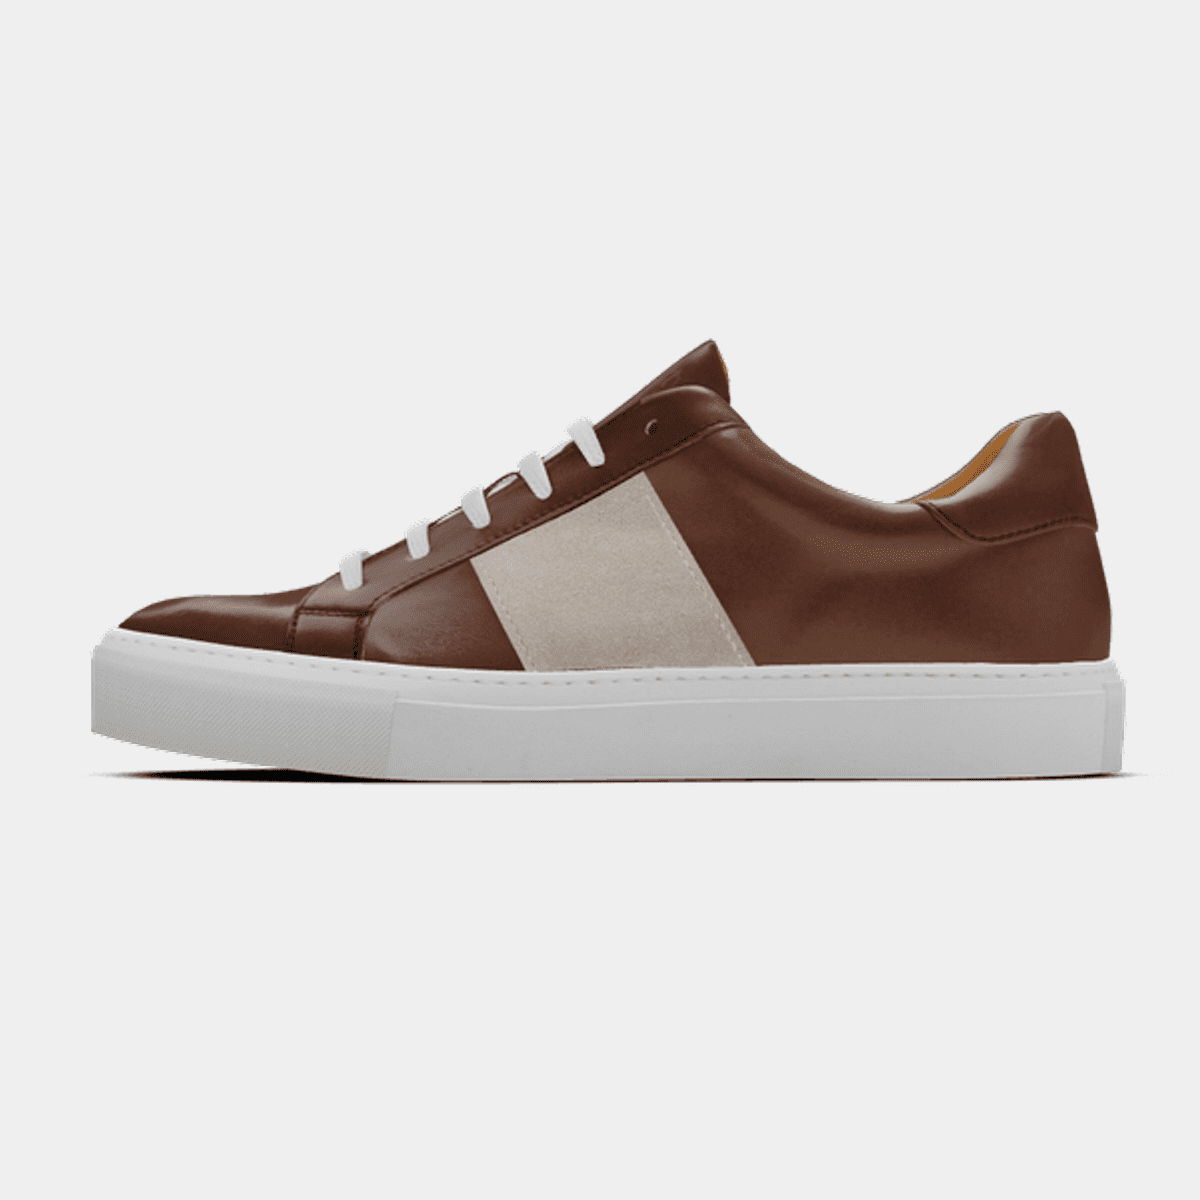 Brown & grey leather and suede Sneakers with contrast side band